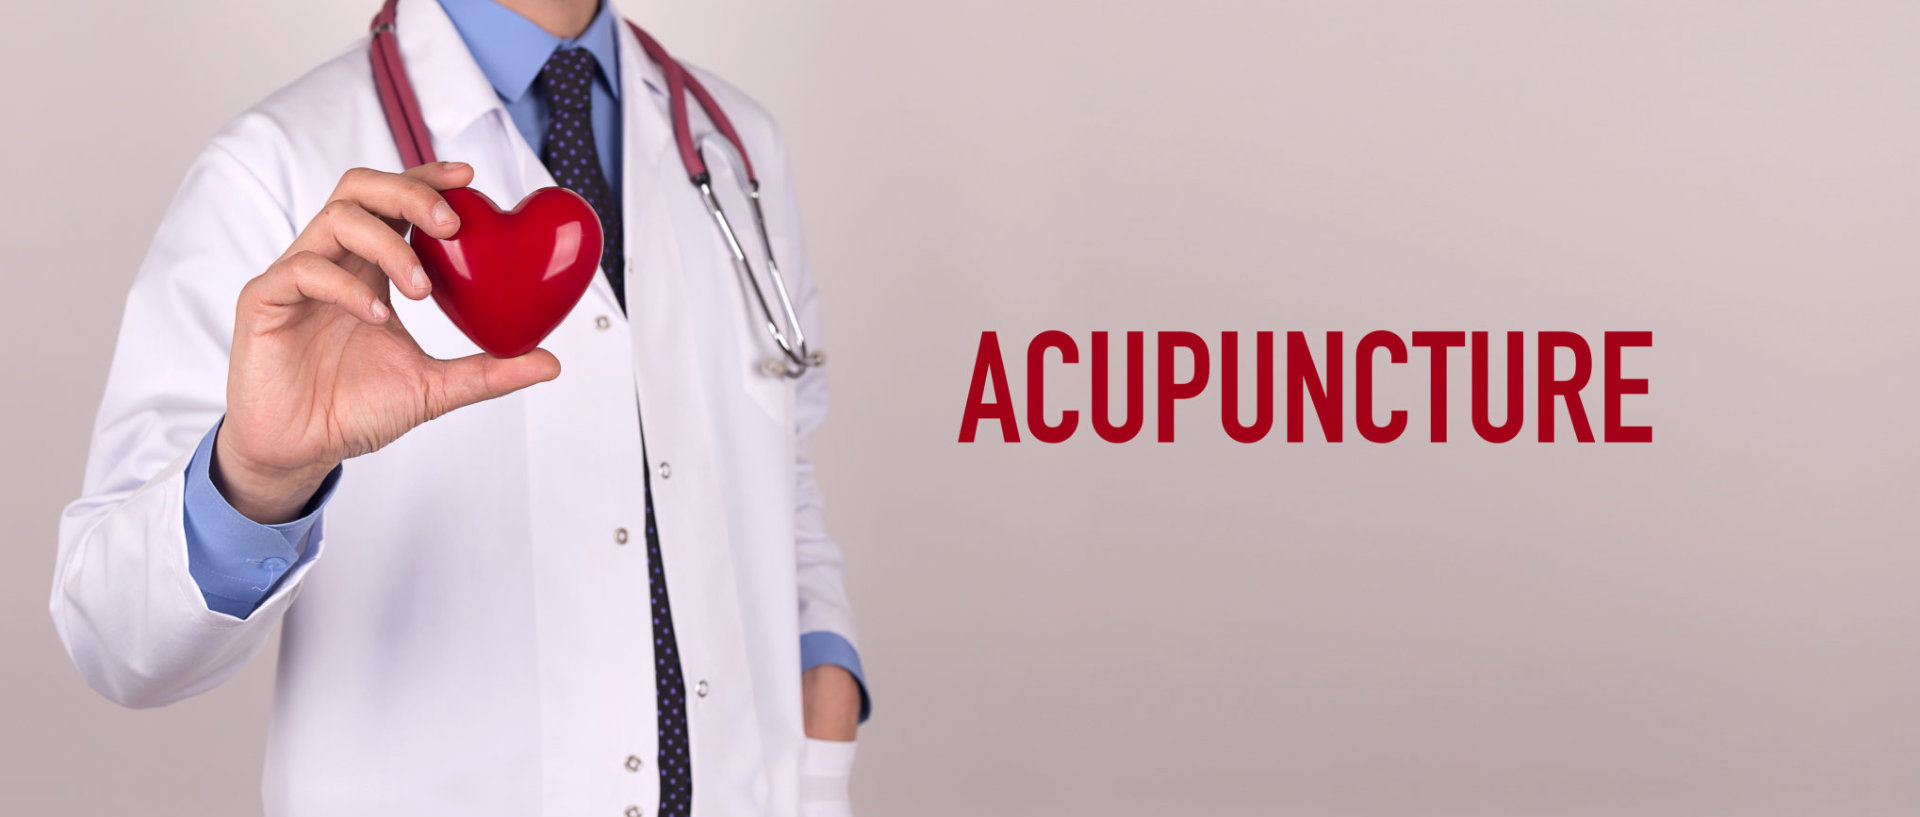 acupunture concept doctor holding a stuffed heart